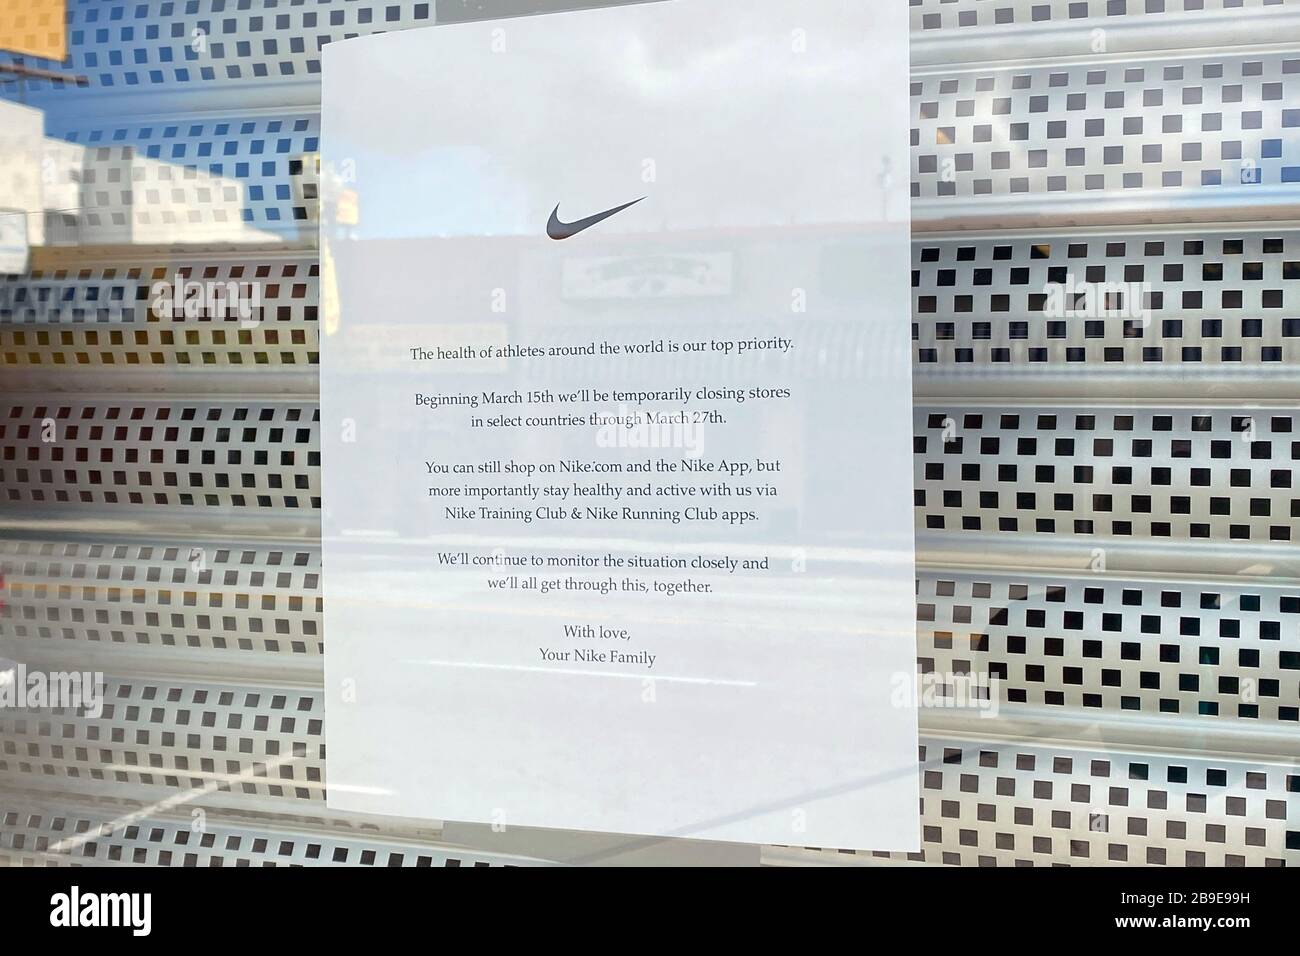 nike store boyle heights